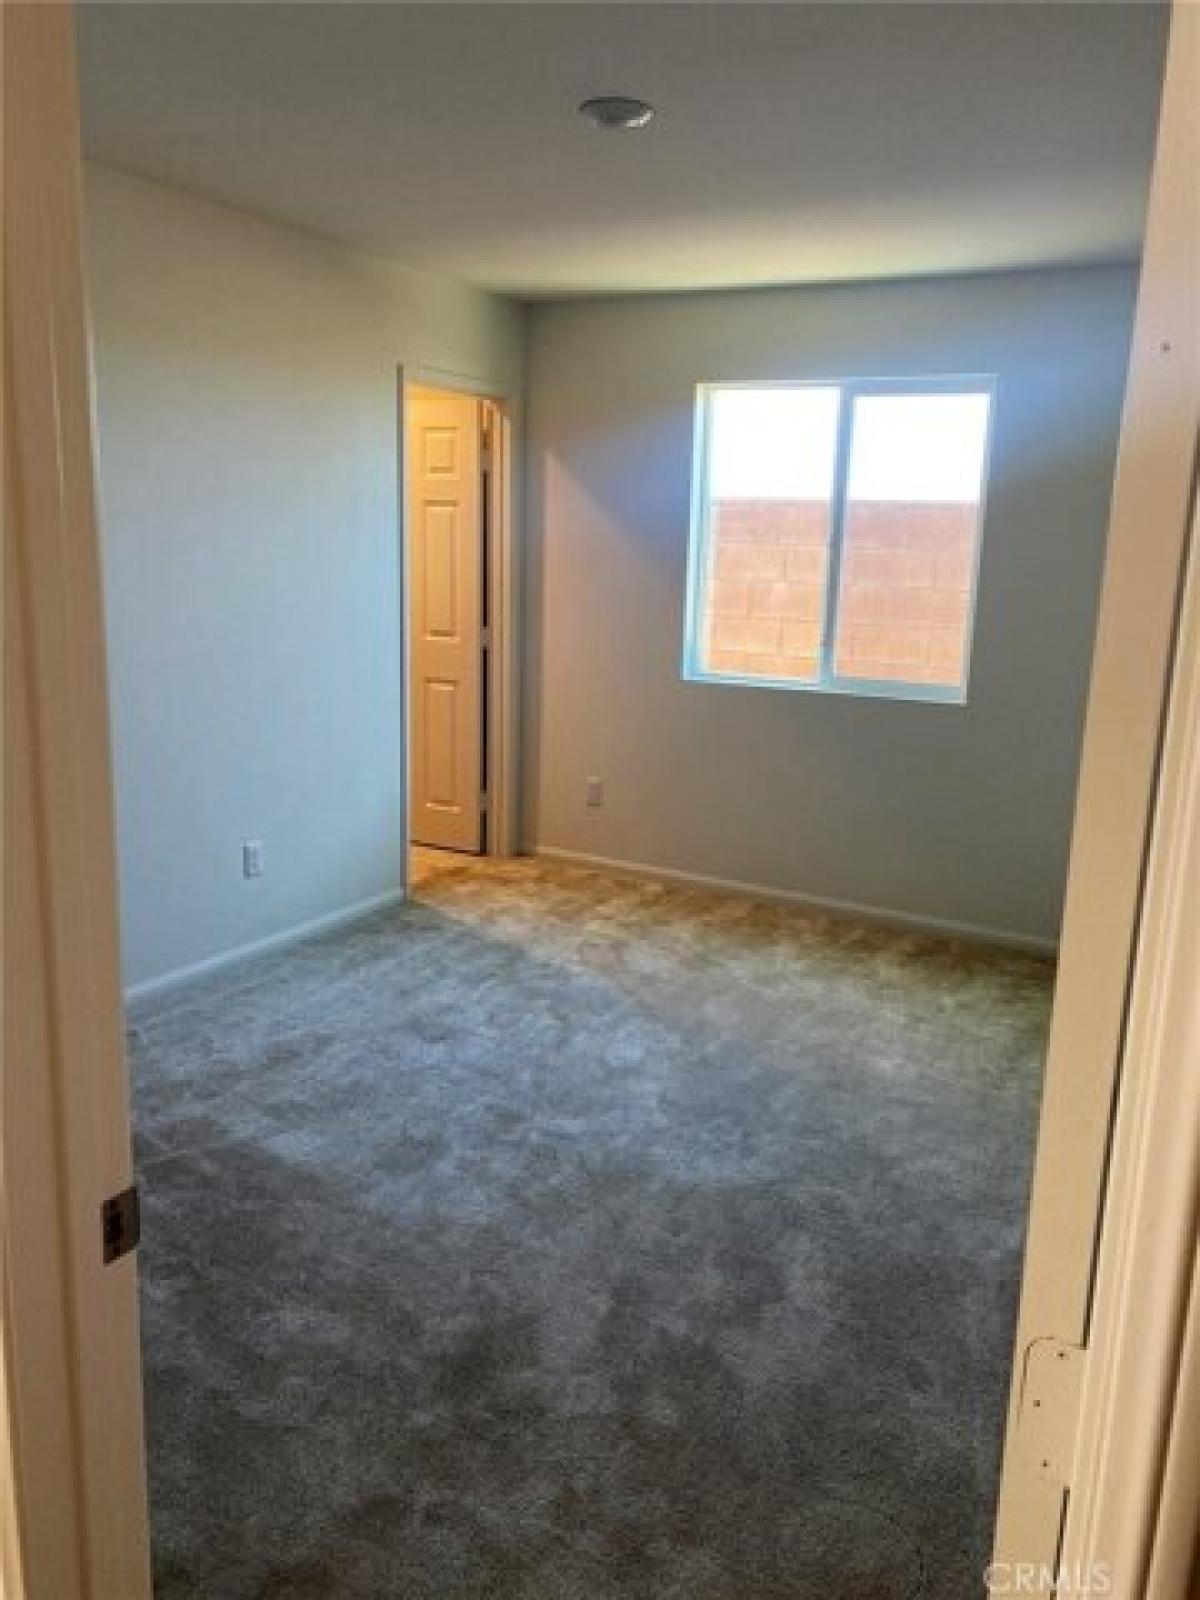 Picture of Home For Rent in Victorville, California, United States